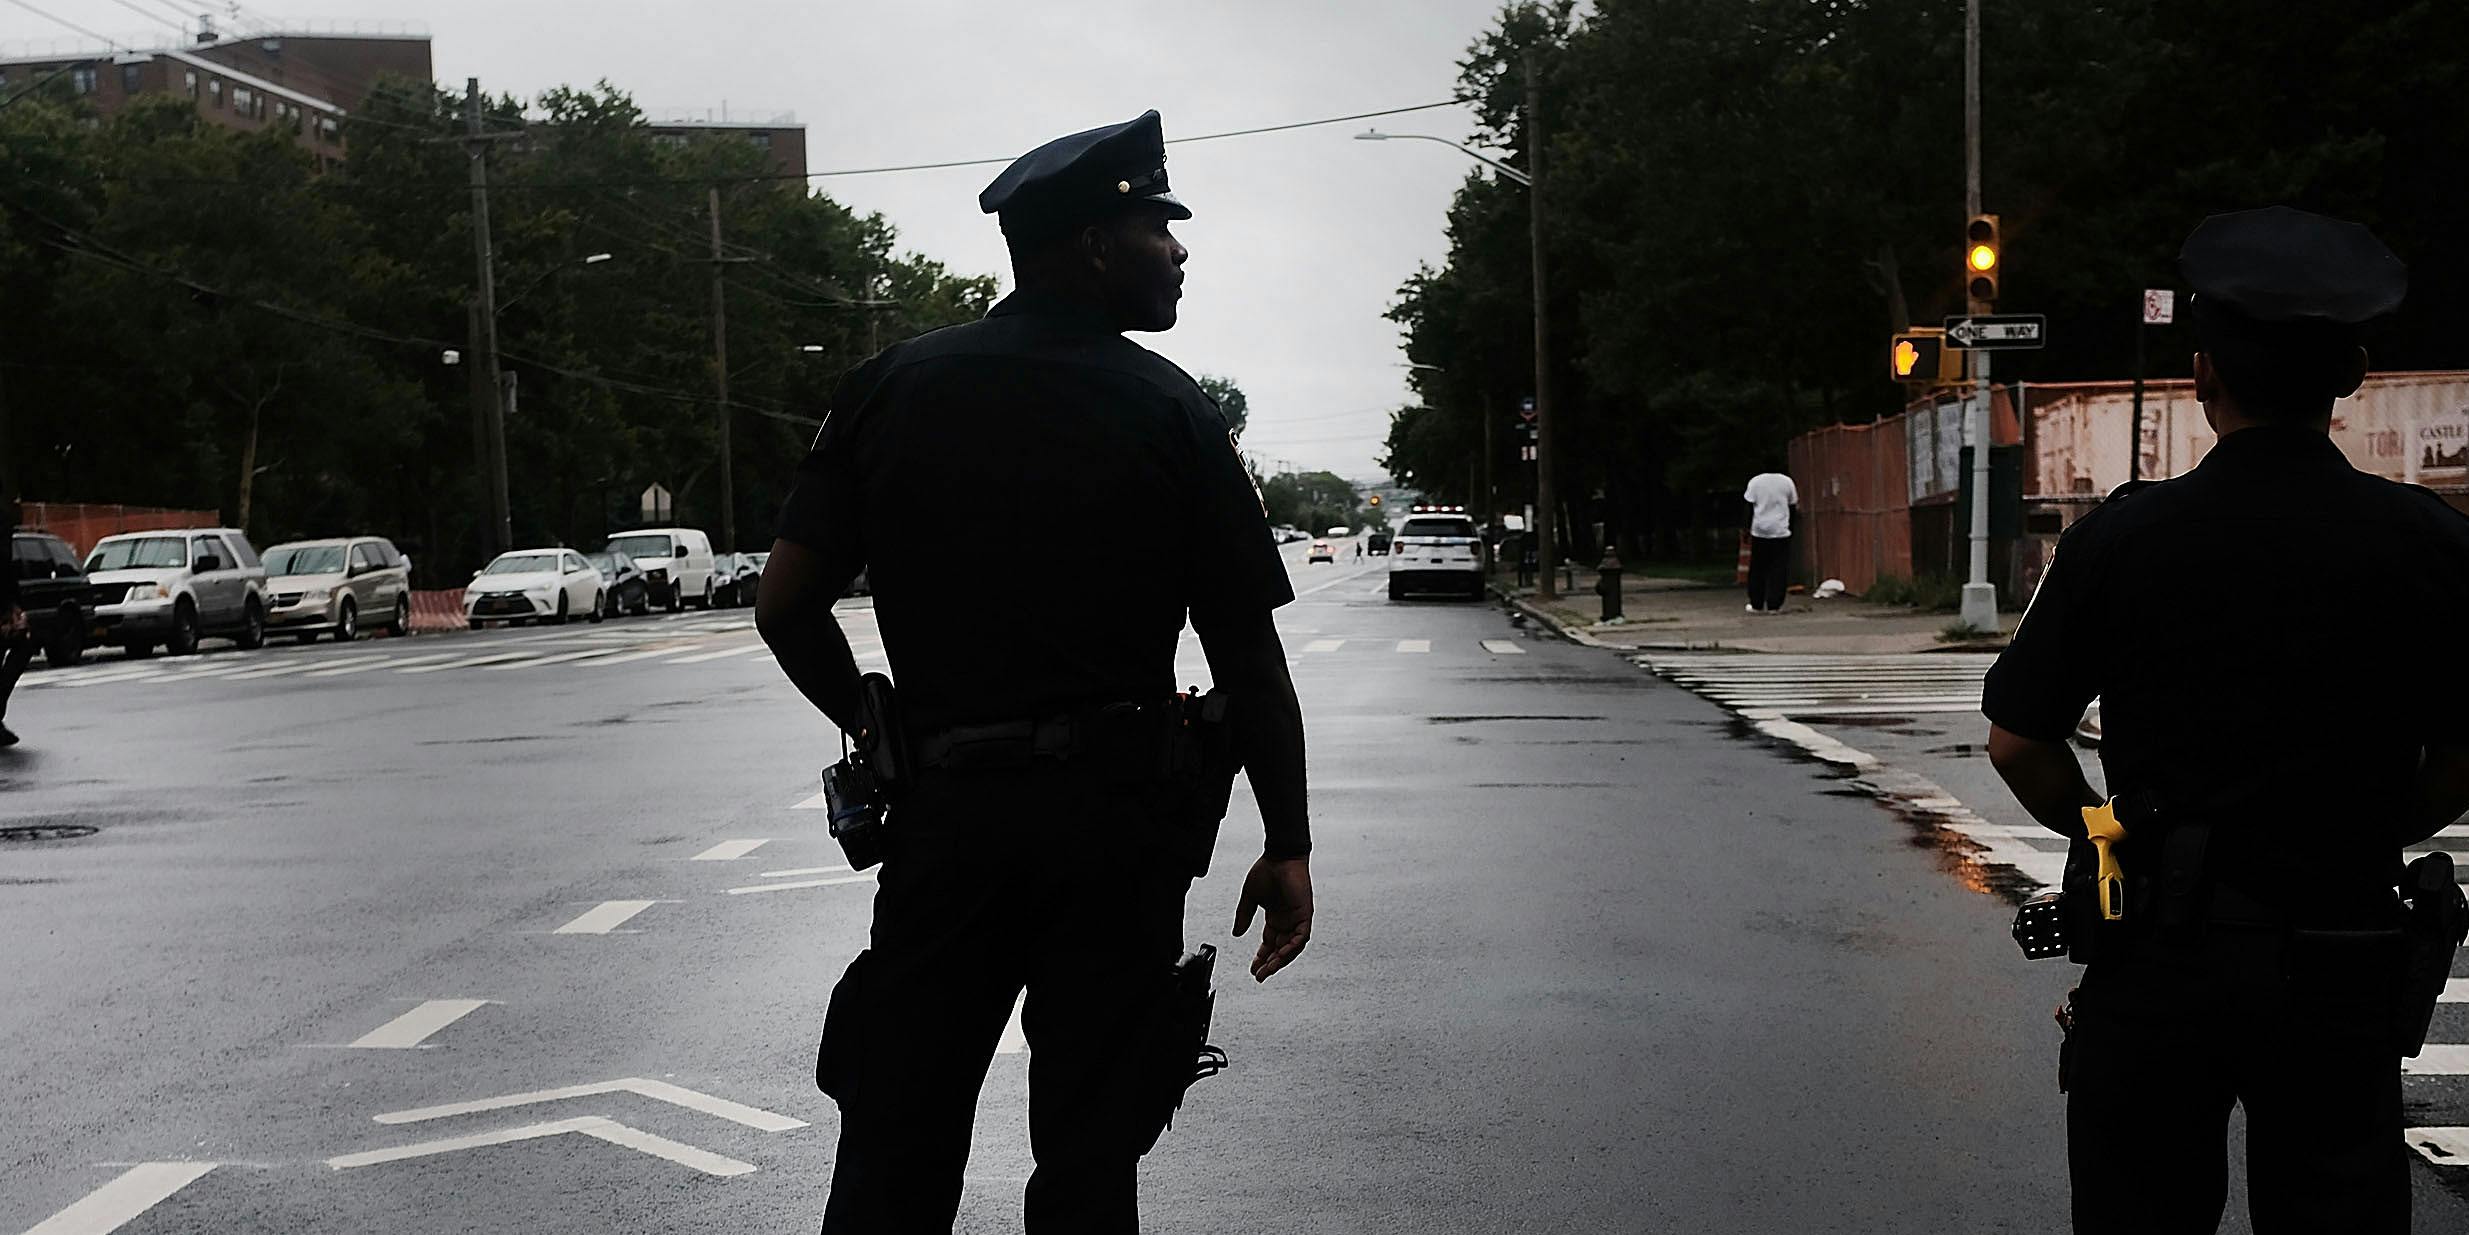 A police officer stands on patrol as people participate in a Silent Peace March against Violence in the Bronx on July 25, 2018 in New York City. A recent study found cannabis legalization does not lead to an increase in felonies in Washington